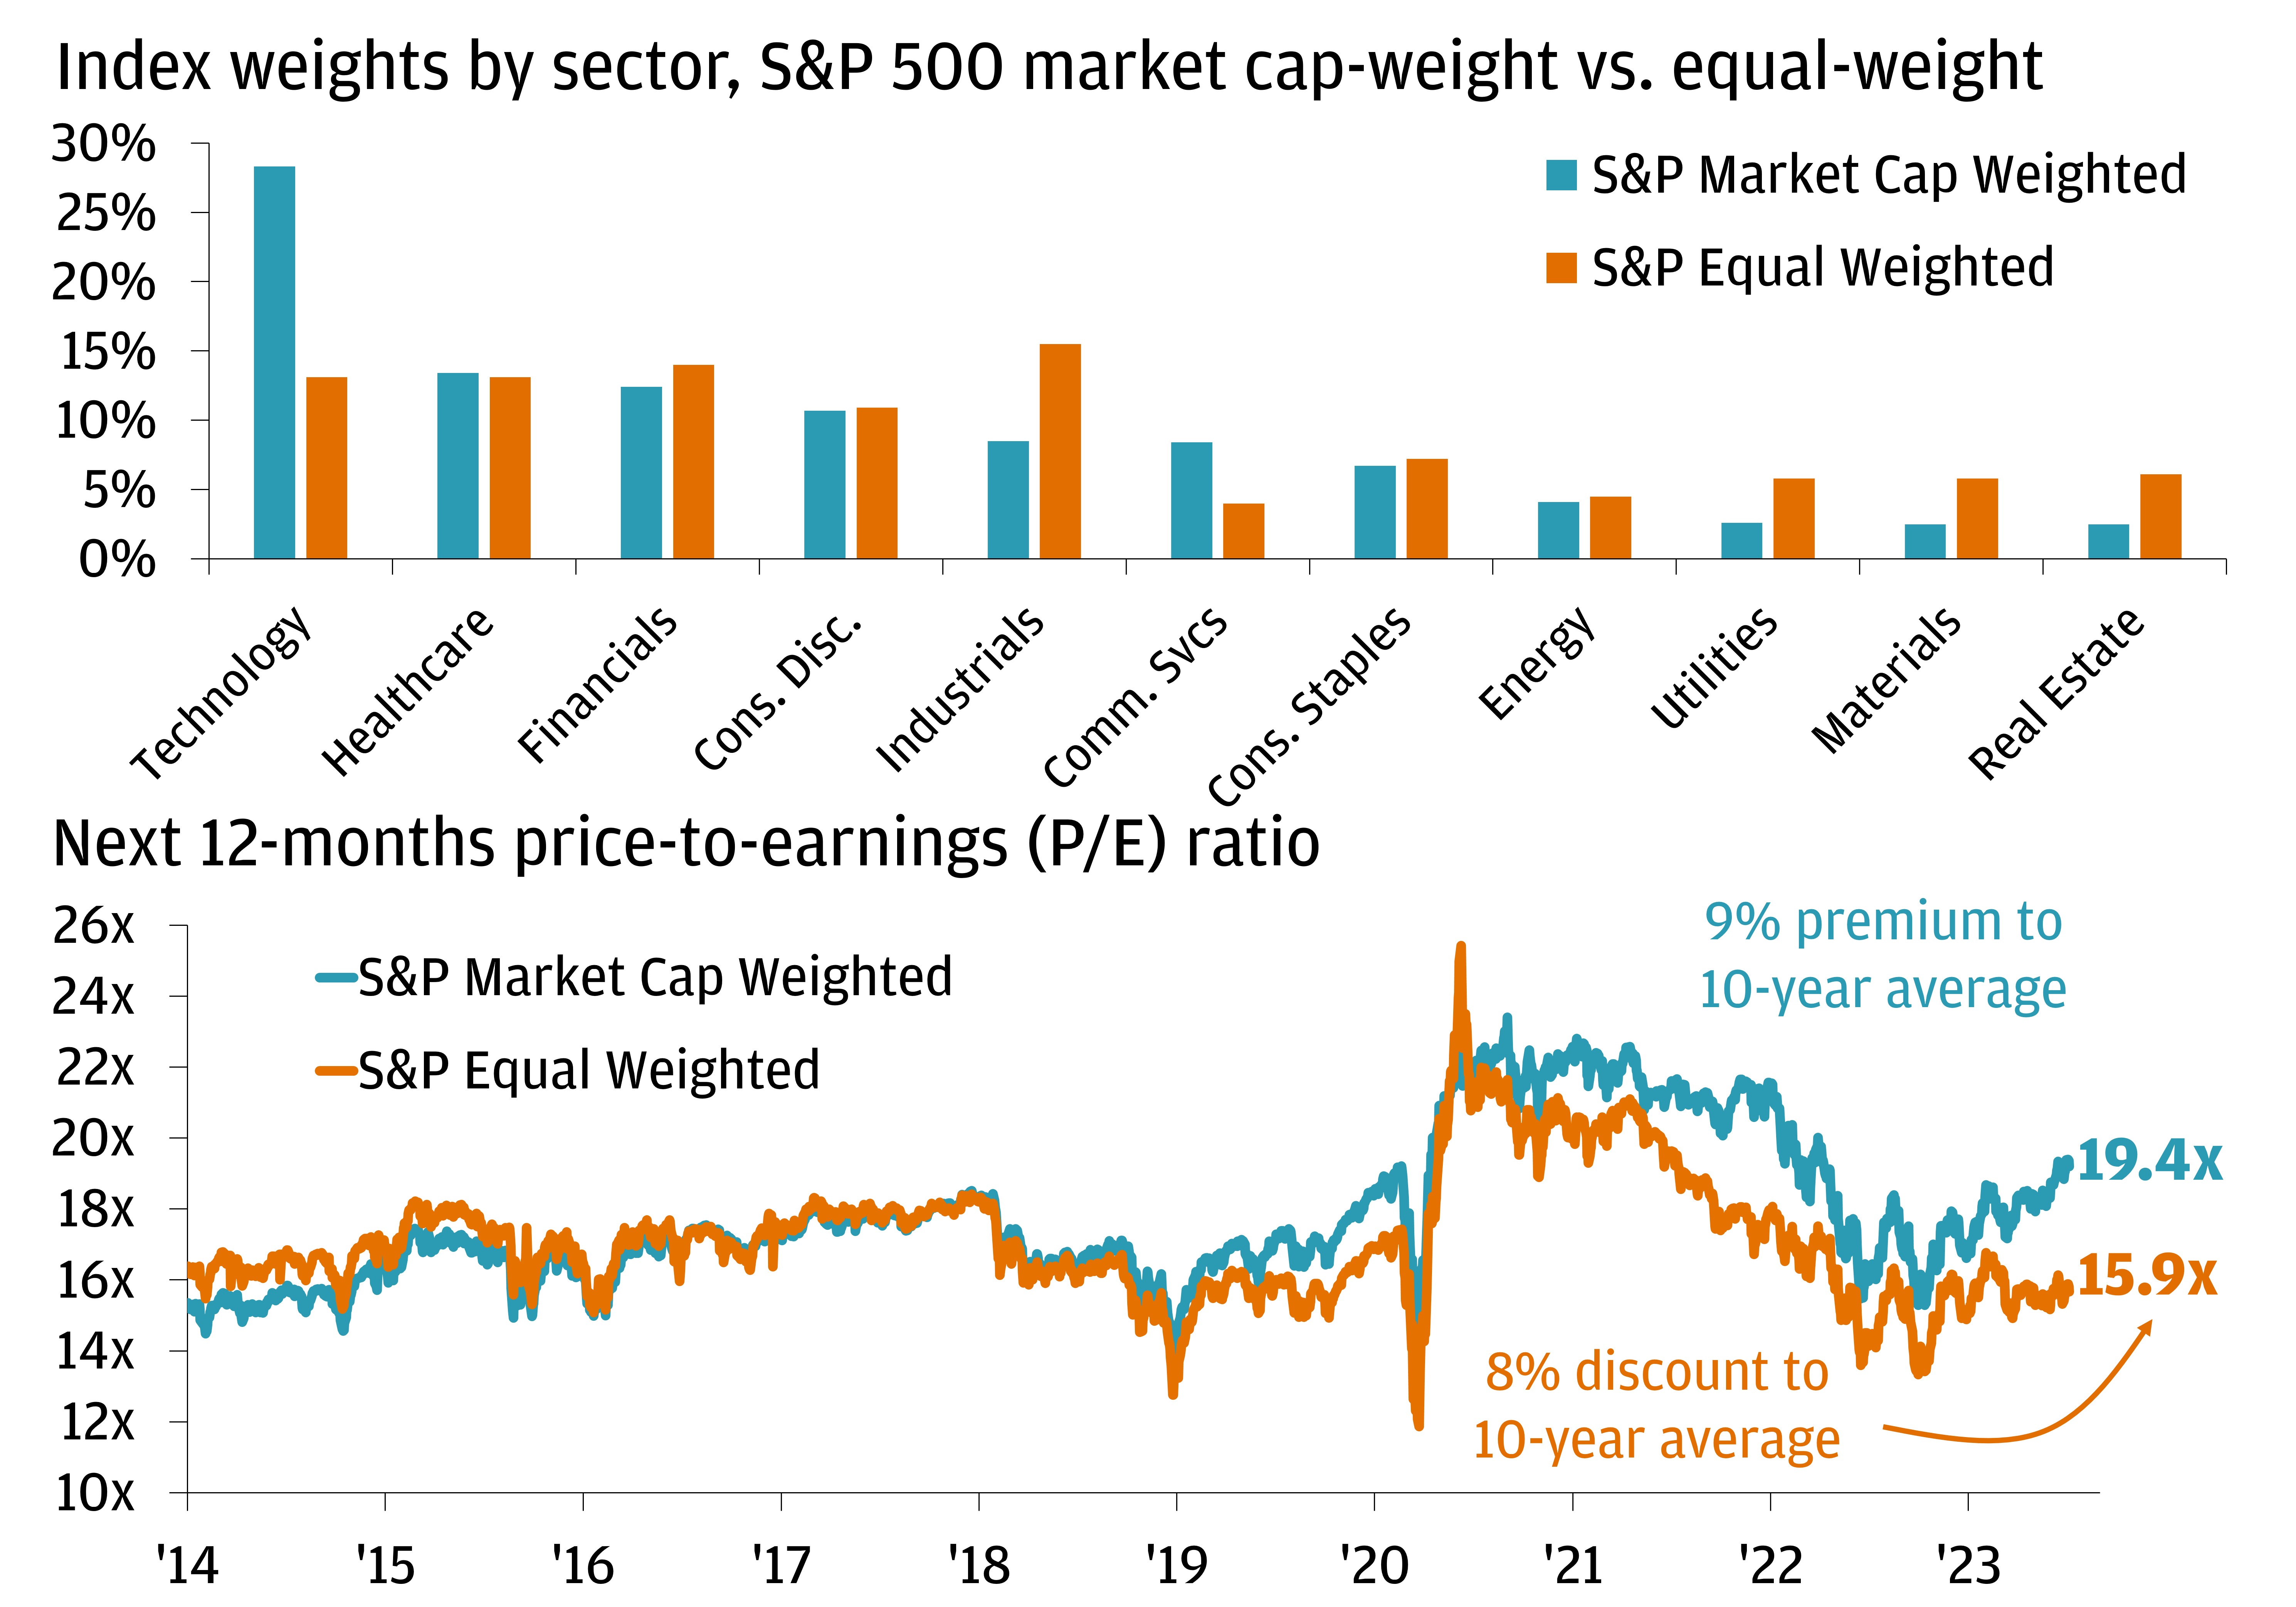 The top chart shows the index weights by sector in the S&P 500 market cap-weight vs. equal-weight. The bottom chart shows the next 12-months price-to-earnings (P/E) ratio for the S&P 500 market cap-weight vs. equal-weight.